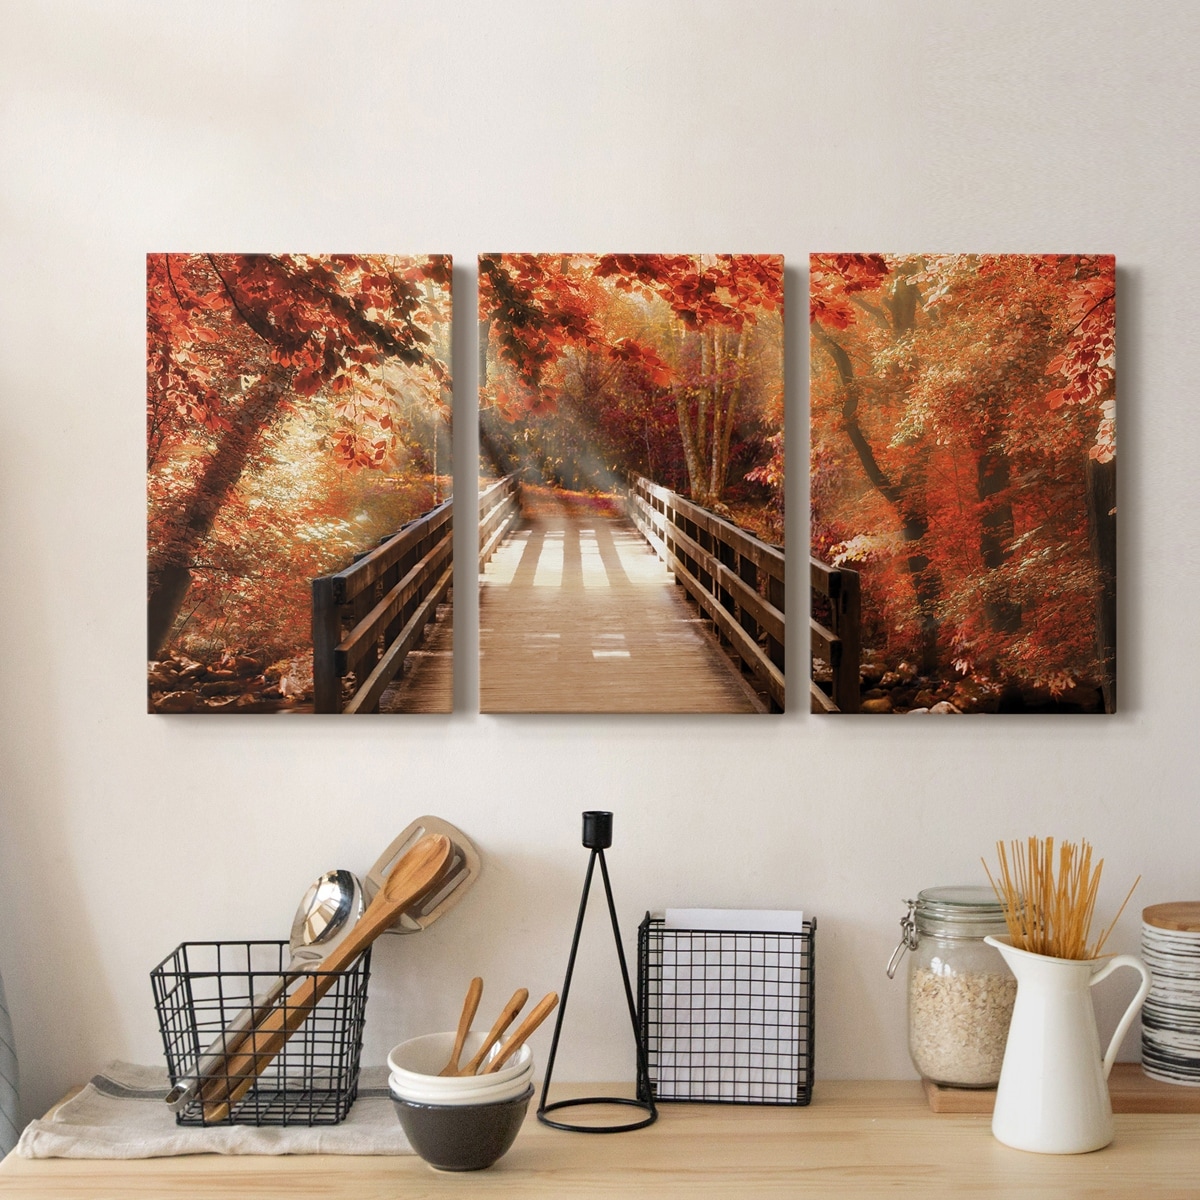 Autumn Bridge- Premium Gallery Wrapped Canvas Ready to Hang Bed Bath   Beyond 34597653